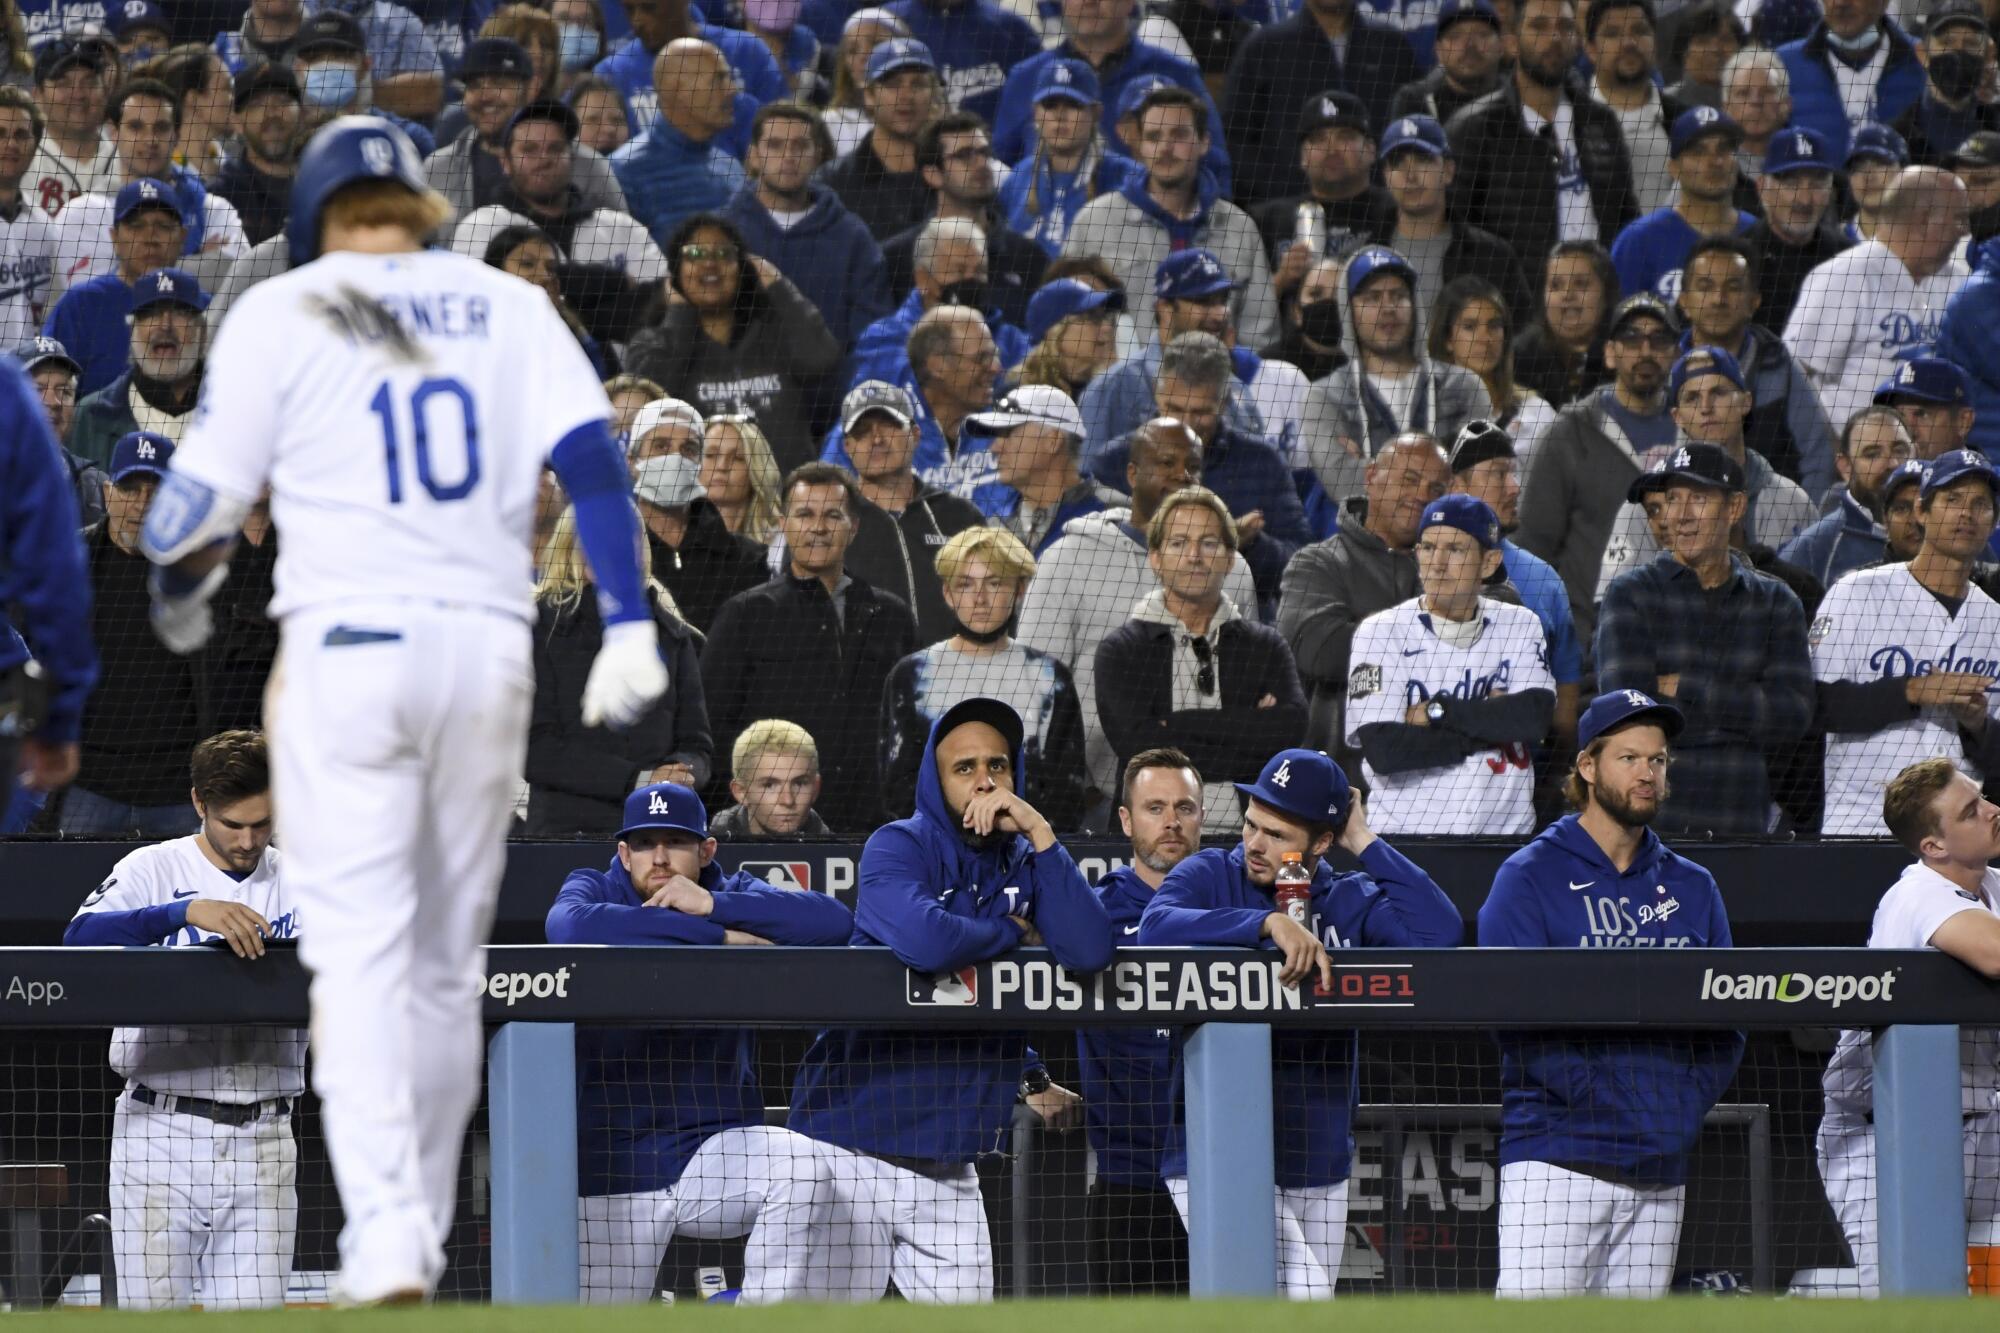 Dodgers players watch teammate Justin Turner limp off the field during the seventh inning.